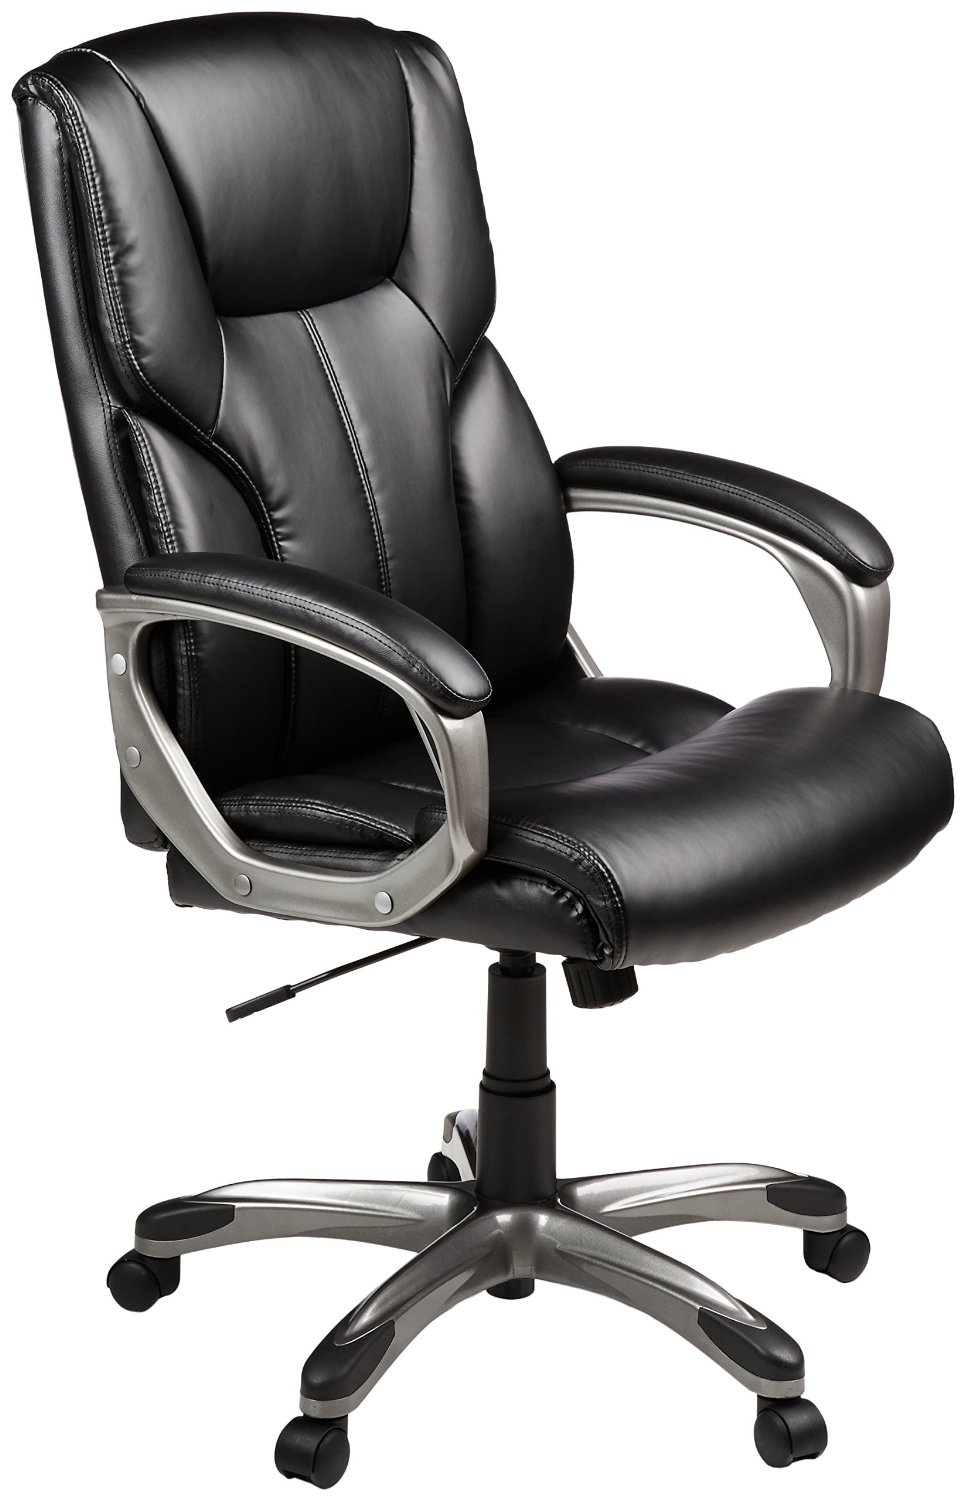 Top 10 Best Office Chairs 2017 – Top Value Reviews